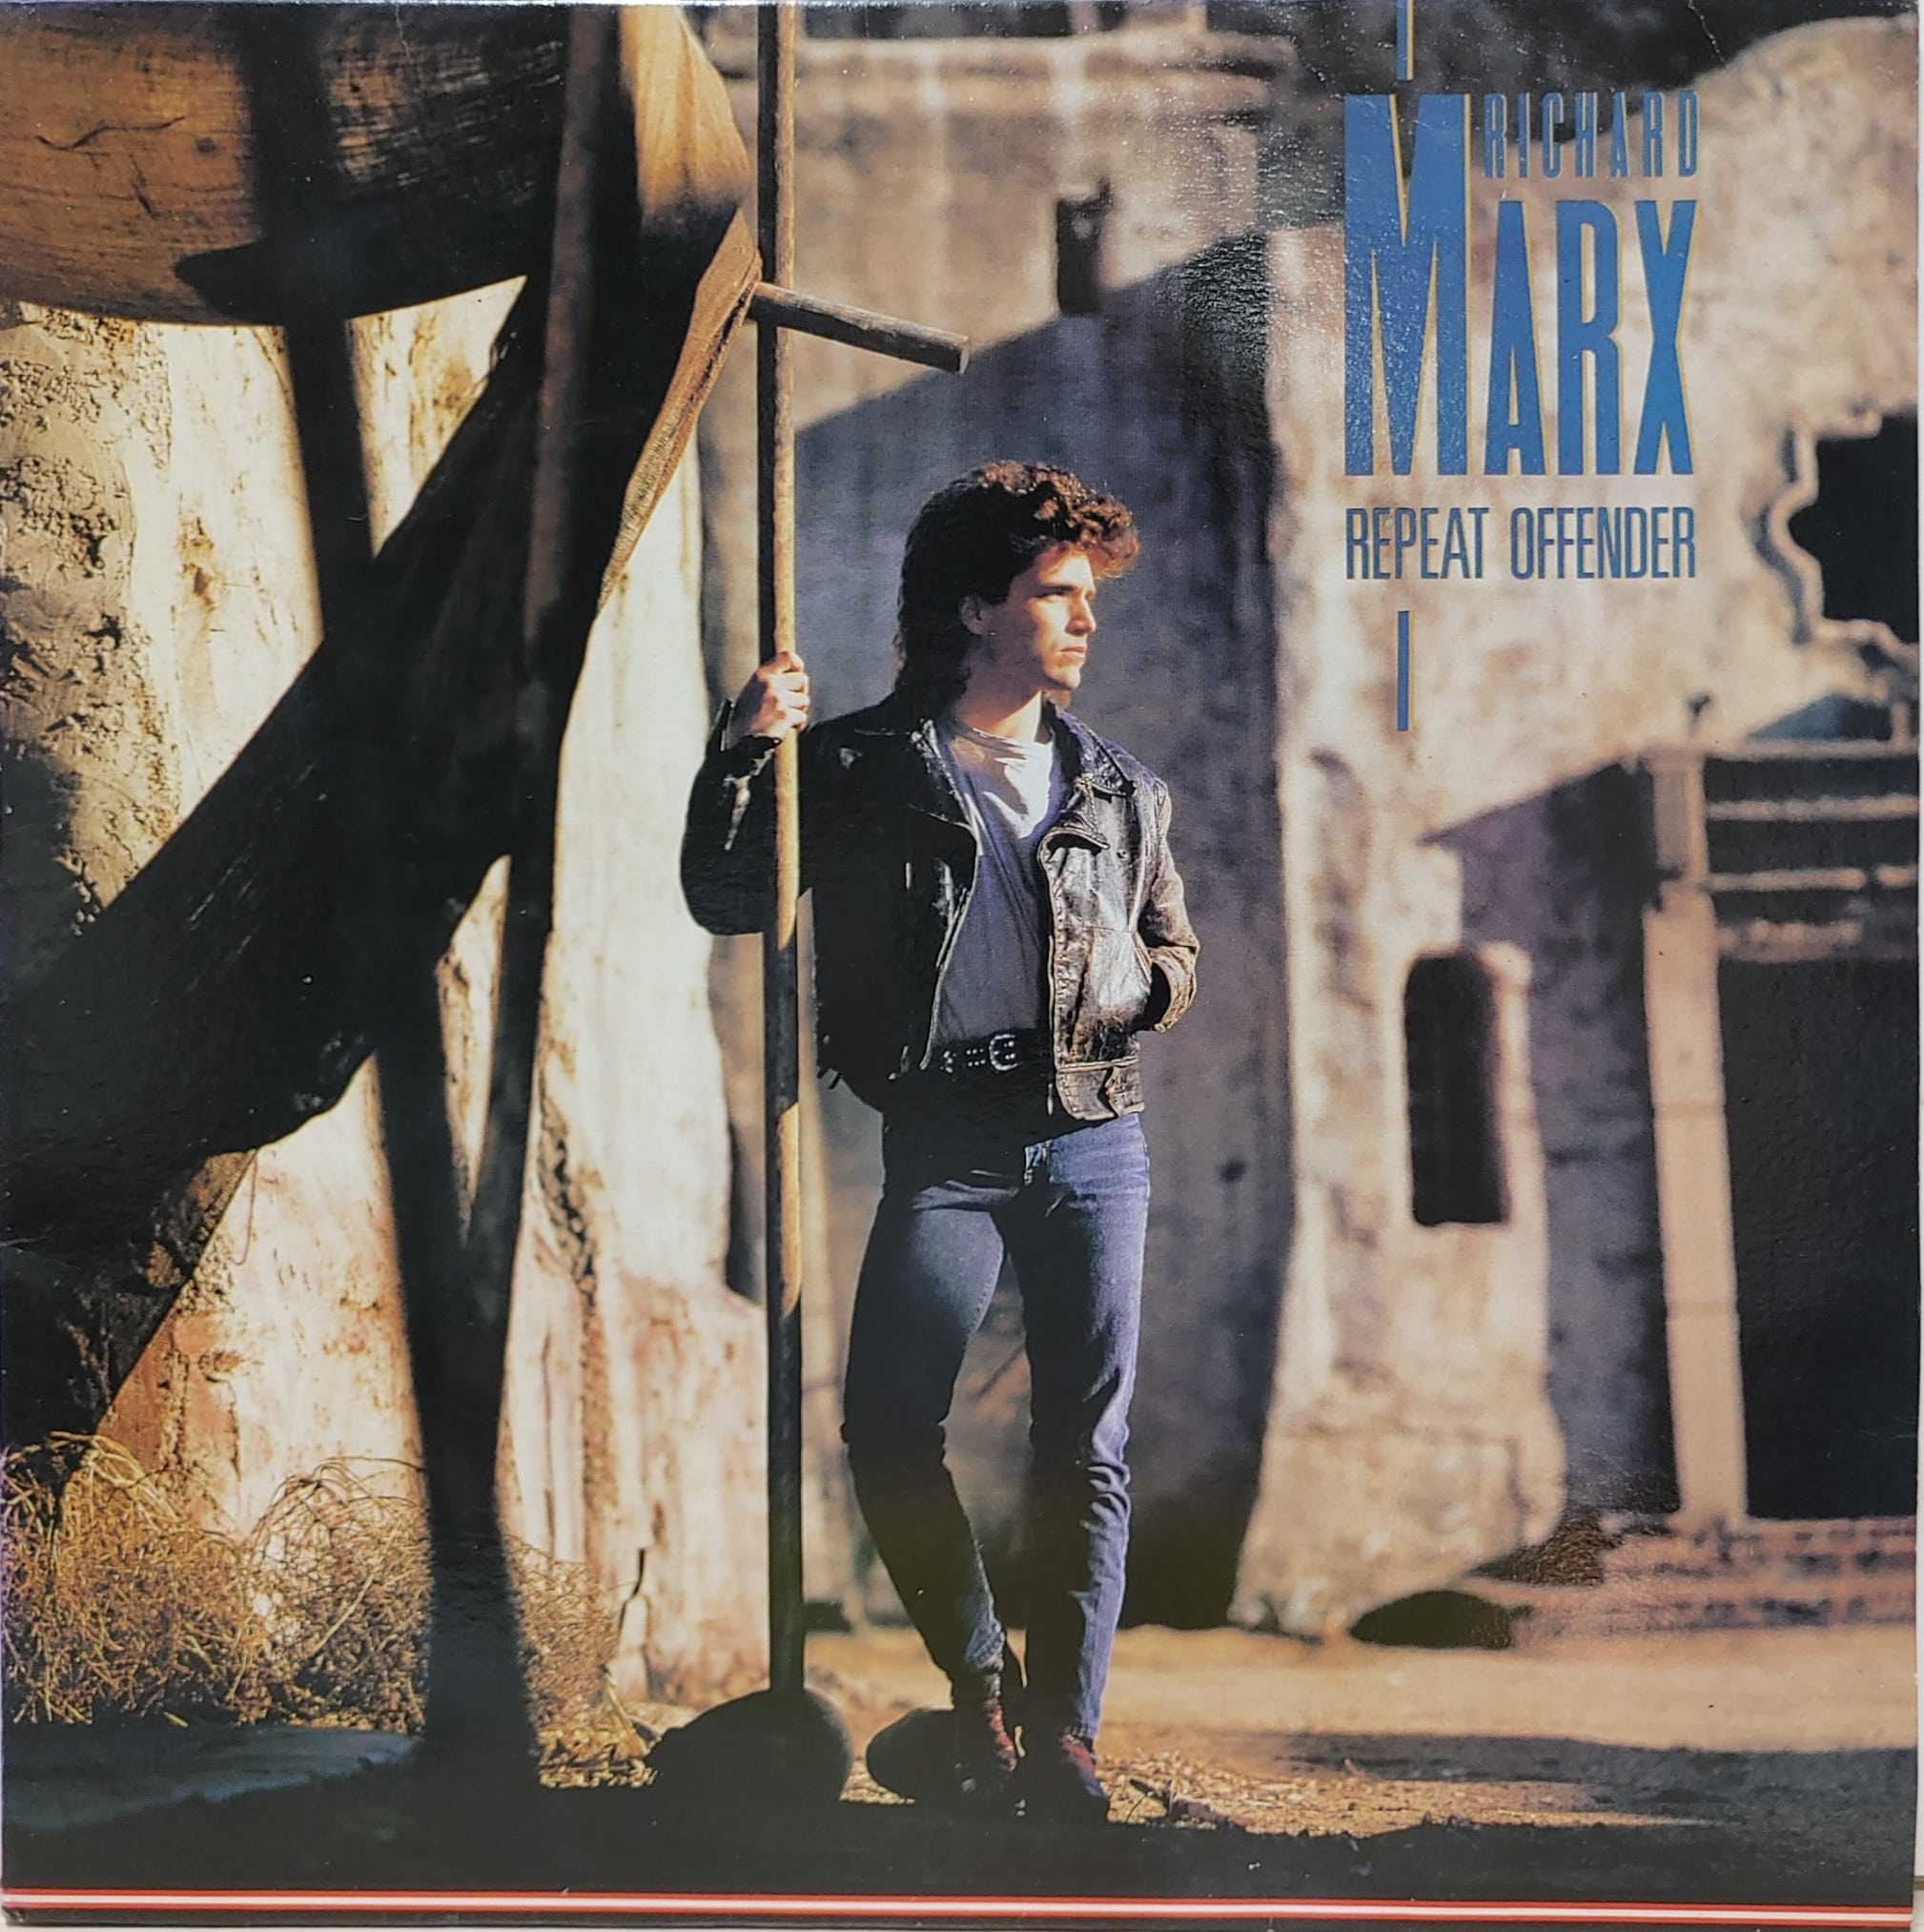 RICHARD MARX / REPEAT OFFENDER